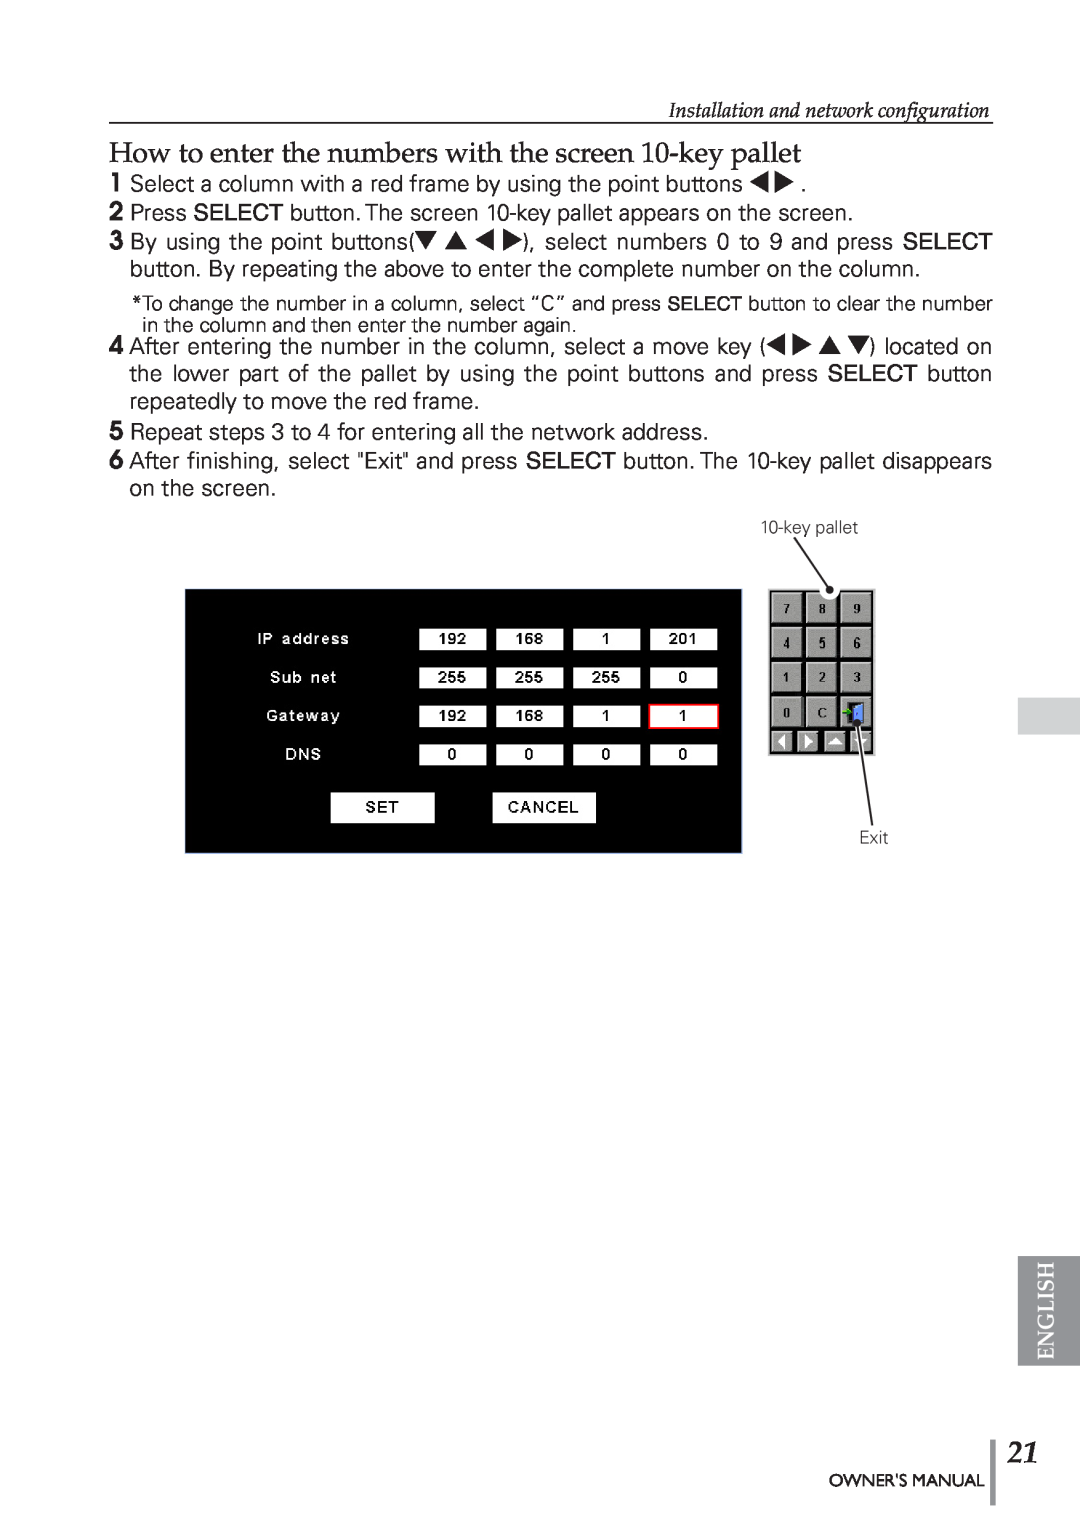 Eiki PJNET-300 owner manual How to enter the numbers with the screen 10-key pallet 